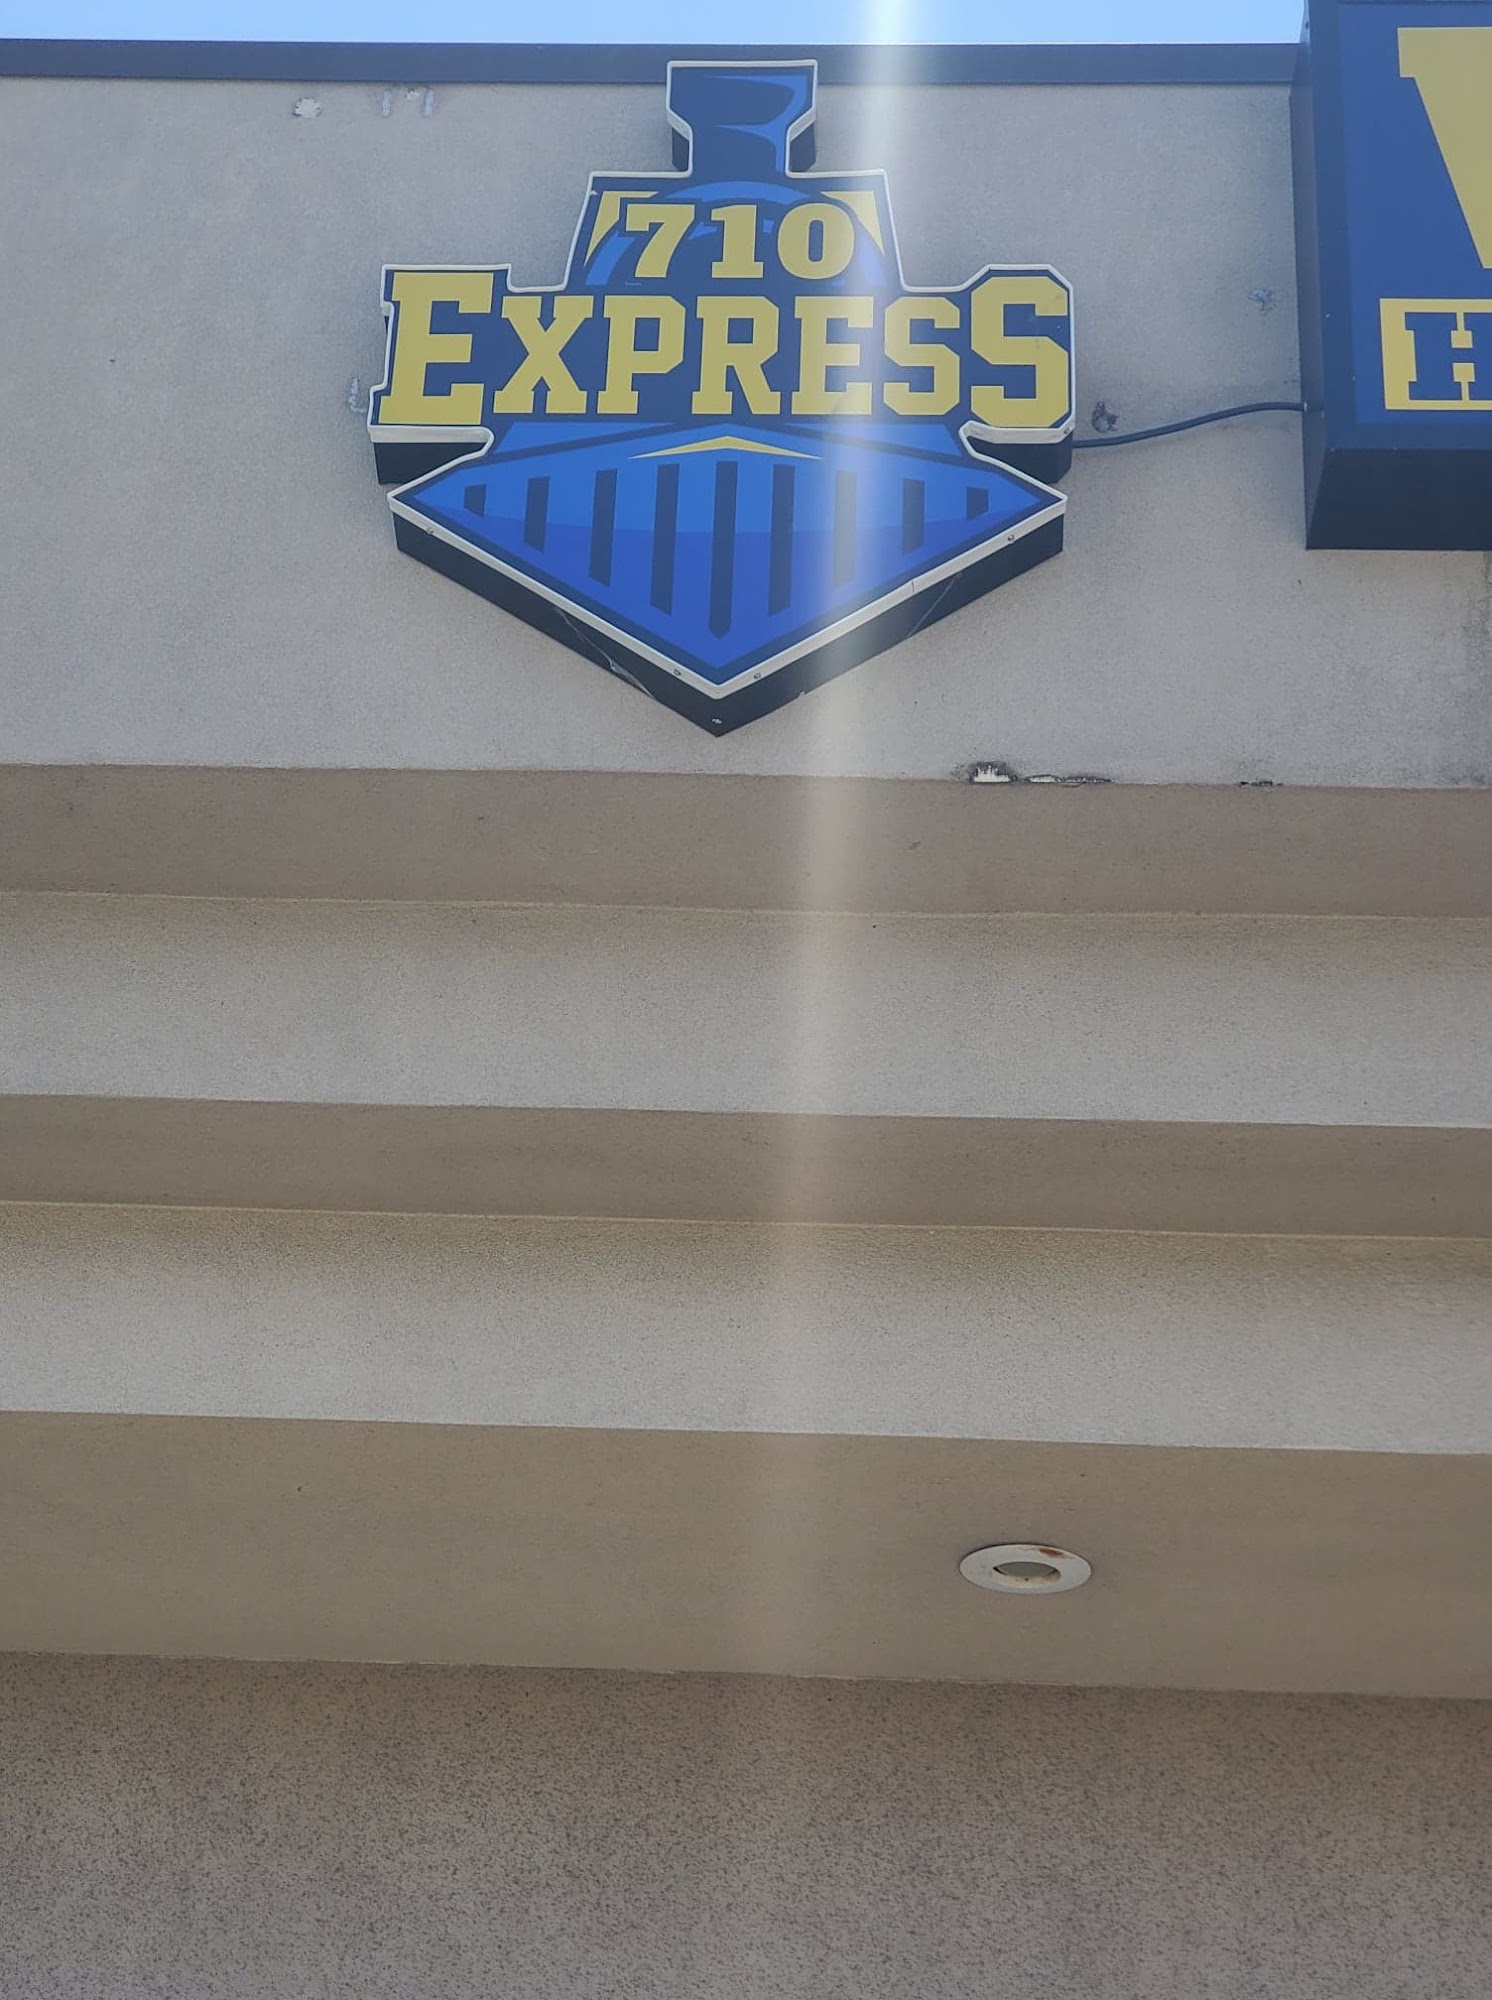 710 Express Vape & Phones 901 W Airline Hwy Ste A-B, 901 W Airline Hwy Suites B, Laplace Louisiana 70068